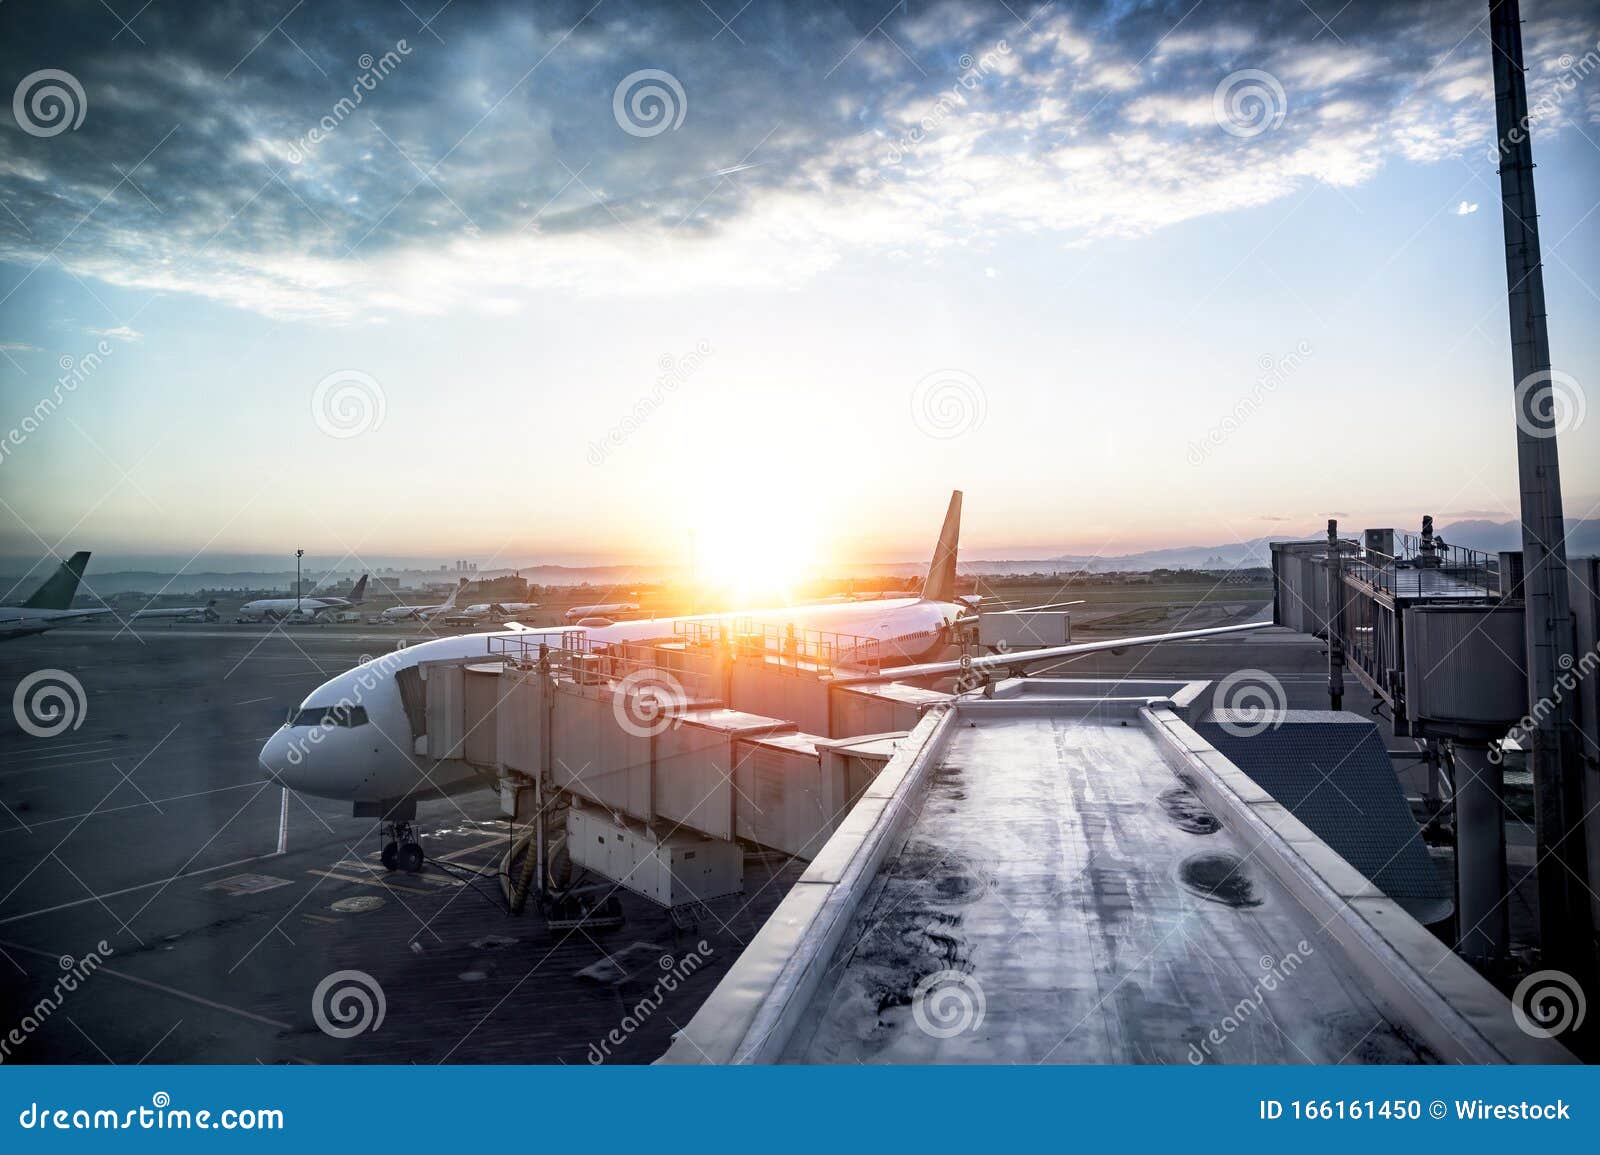 beautiful shot of an airplane at the station with the sun shining in the background